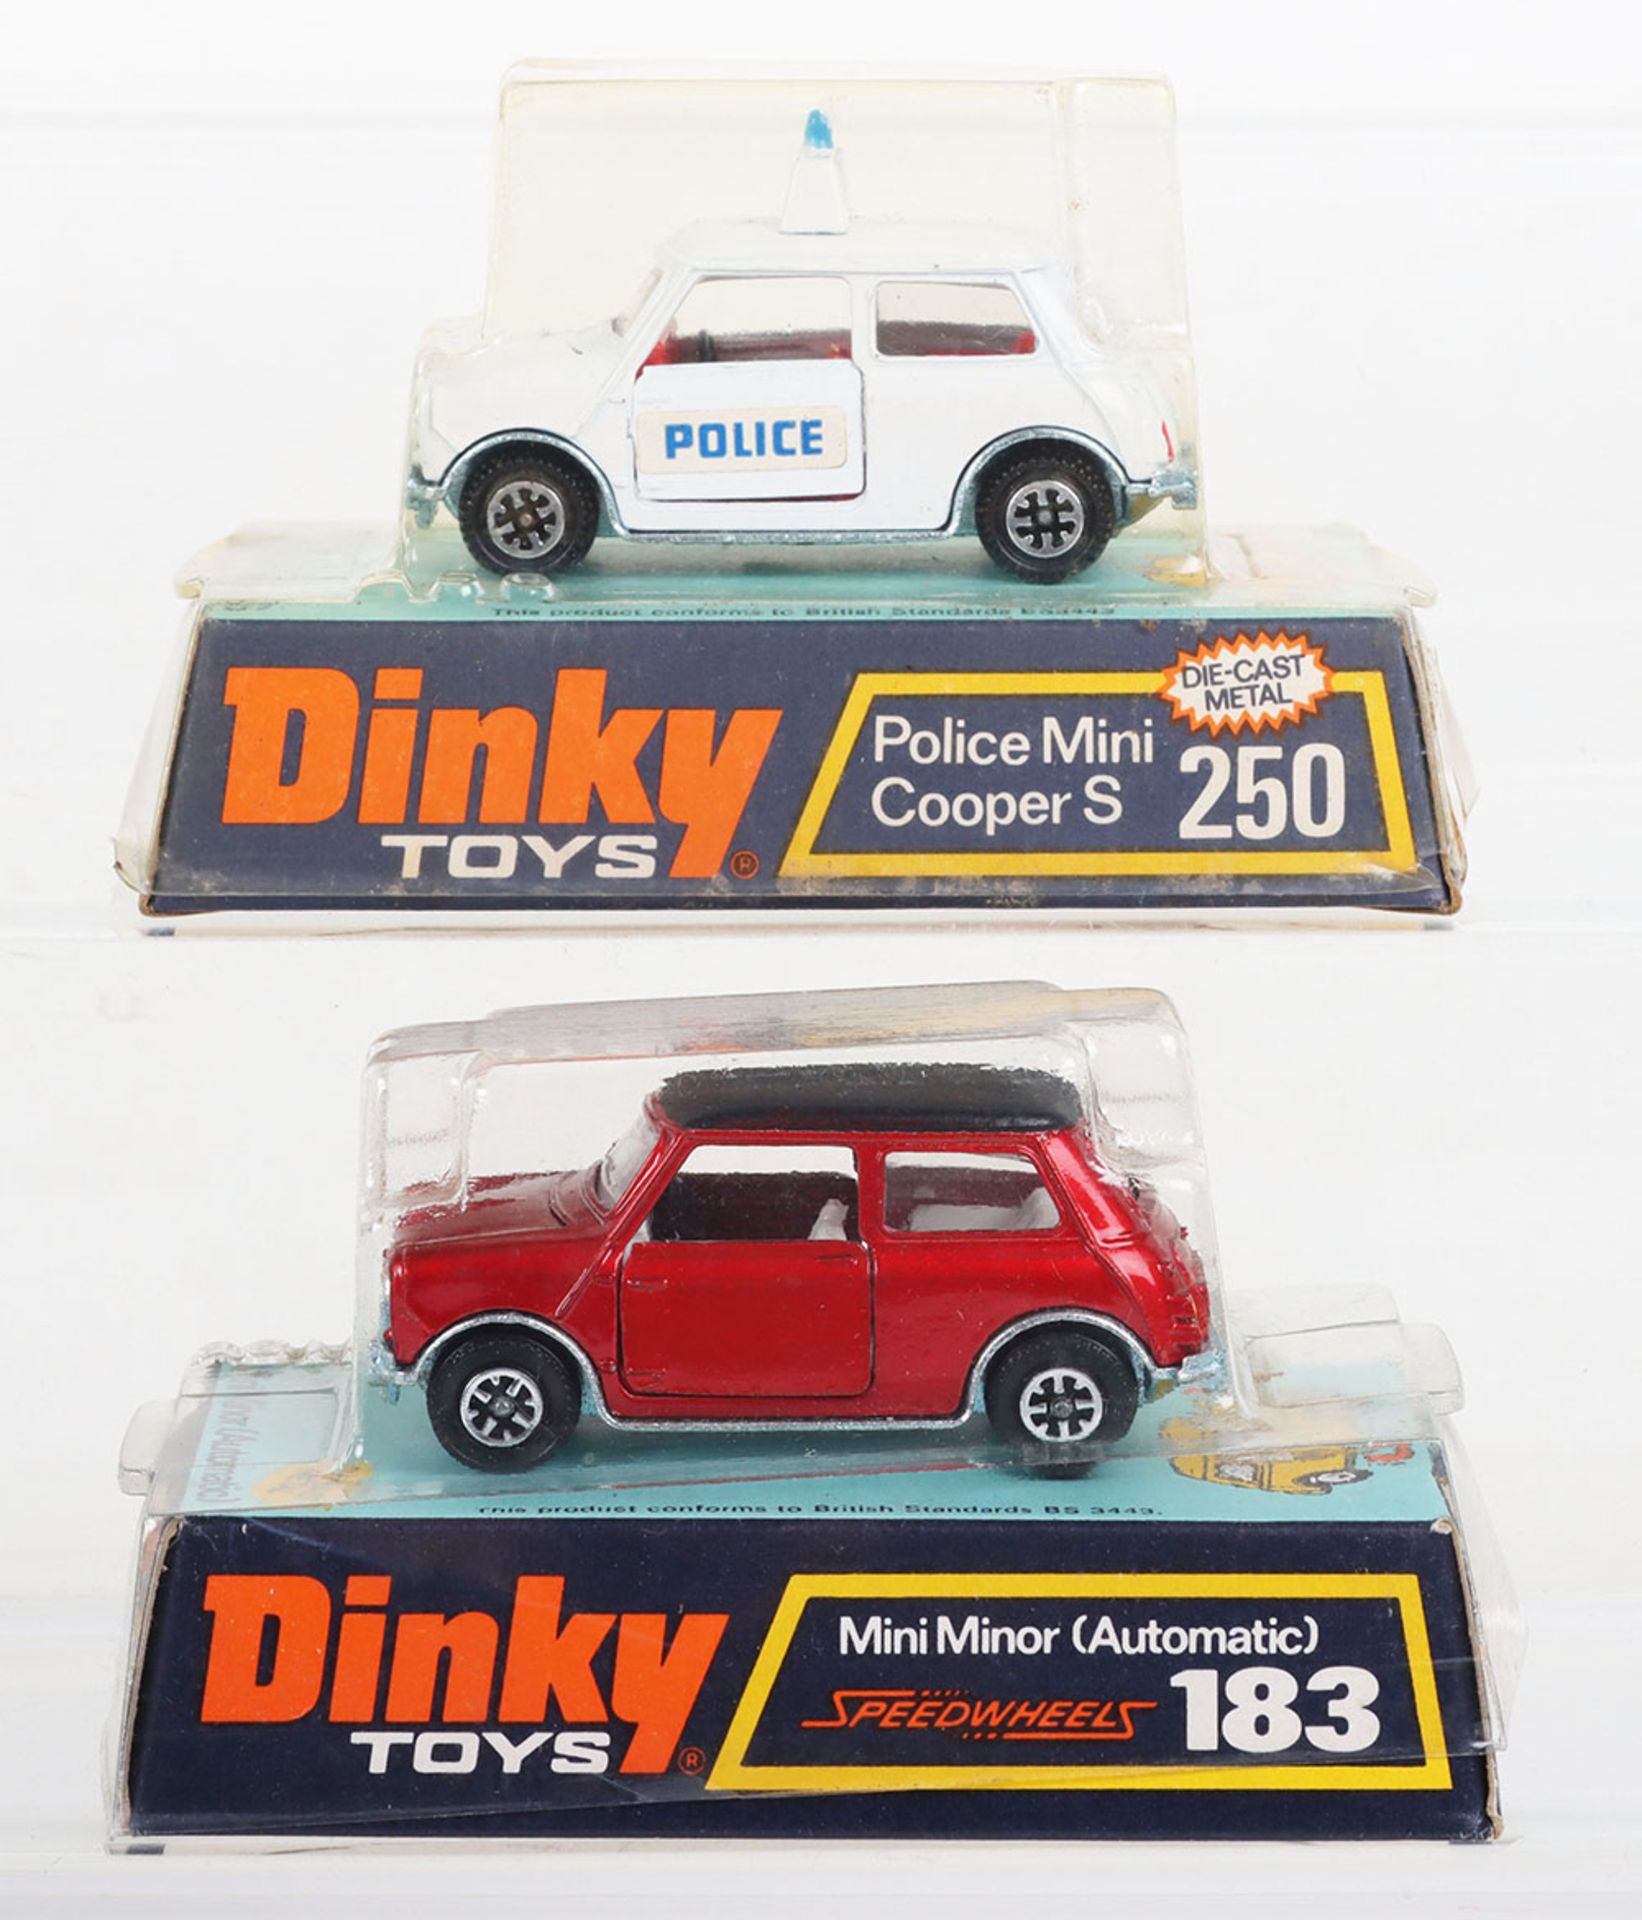 Two Dinky Toys Mini Models